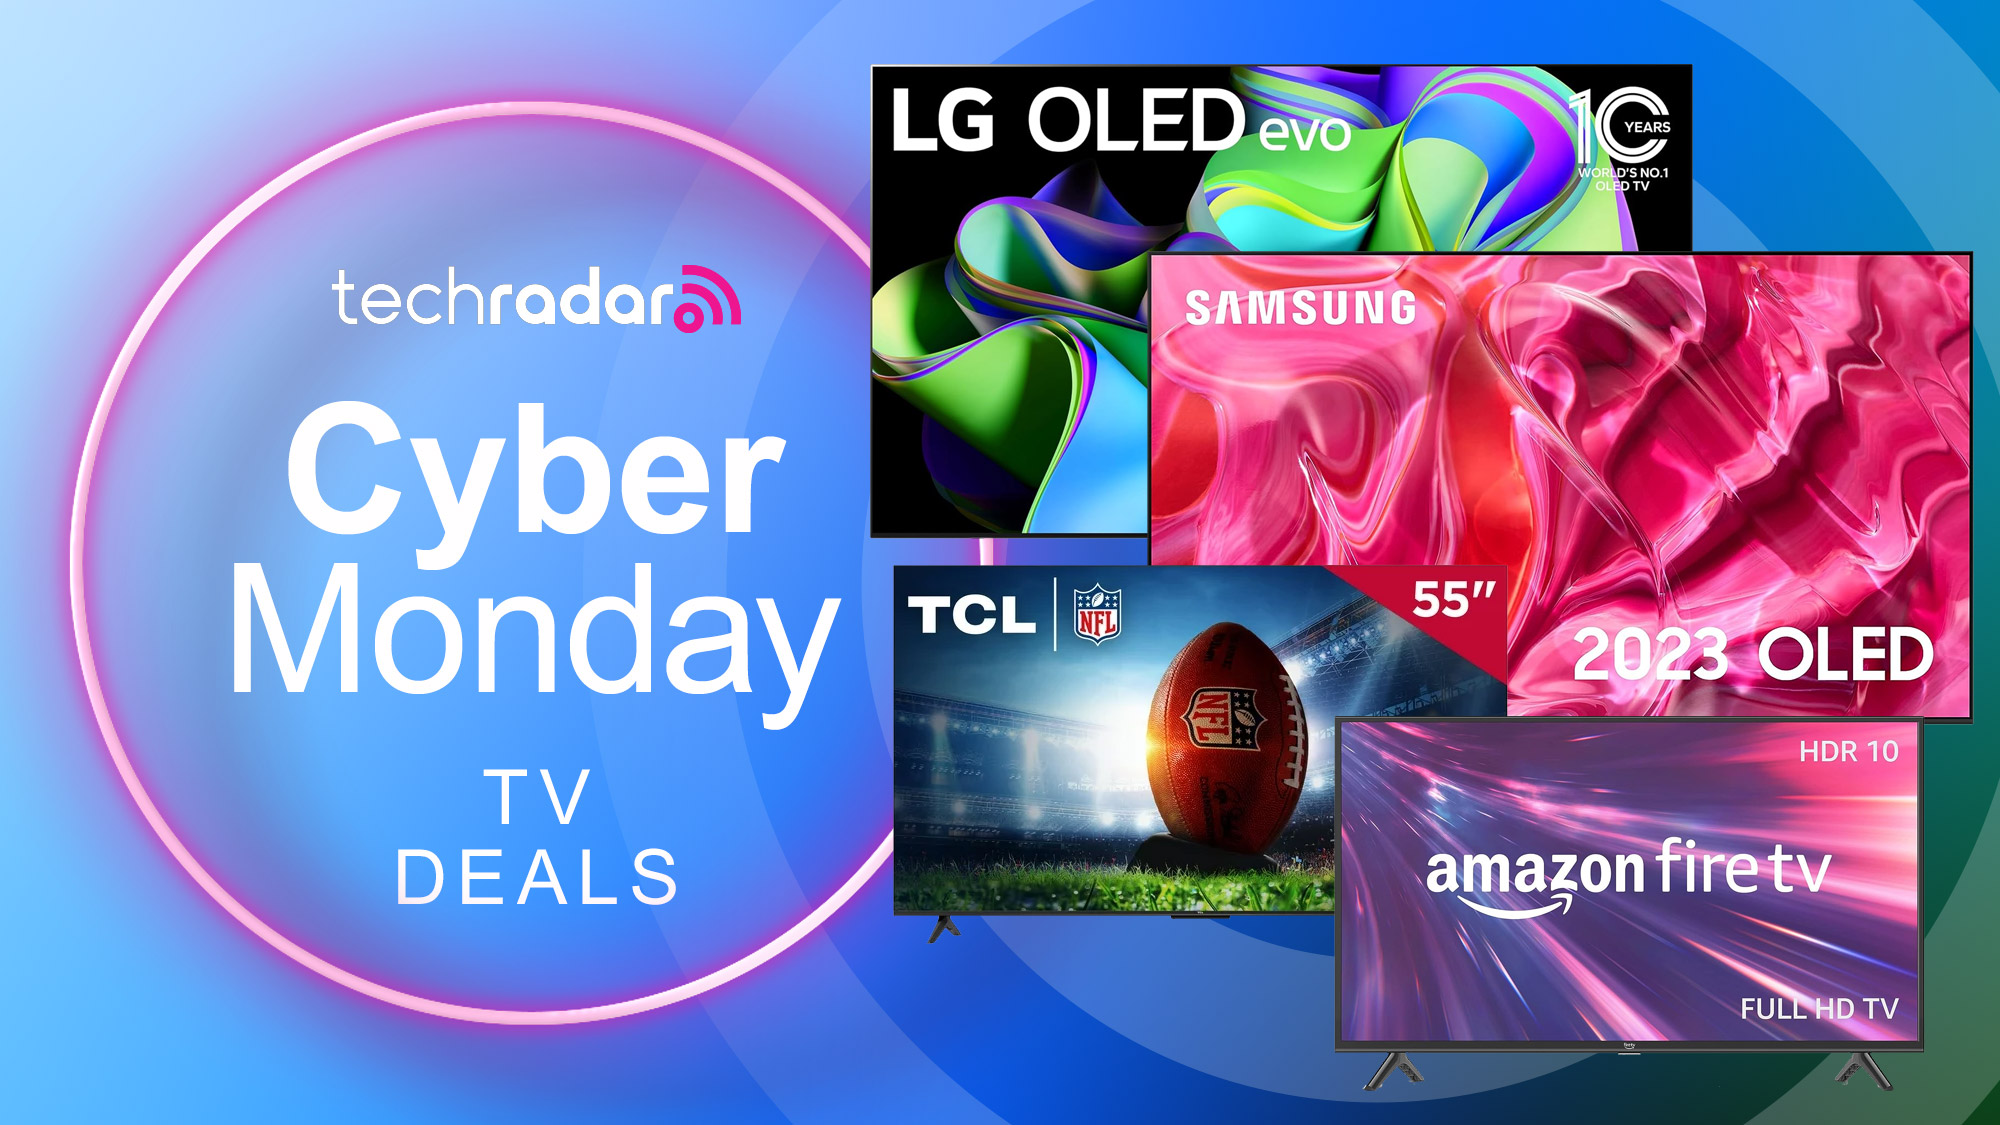 Best Buy Cyber Monday Deals: Over 85 Top Offers From Apple, Lego